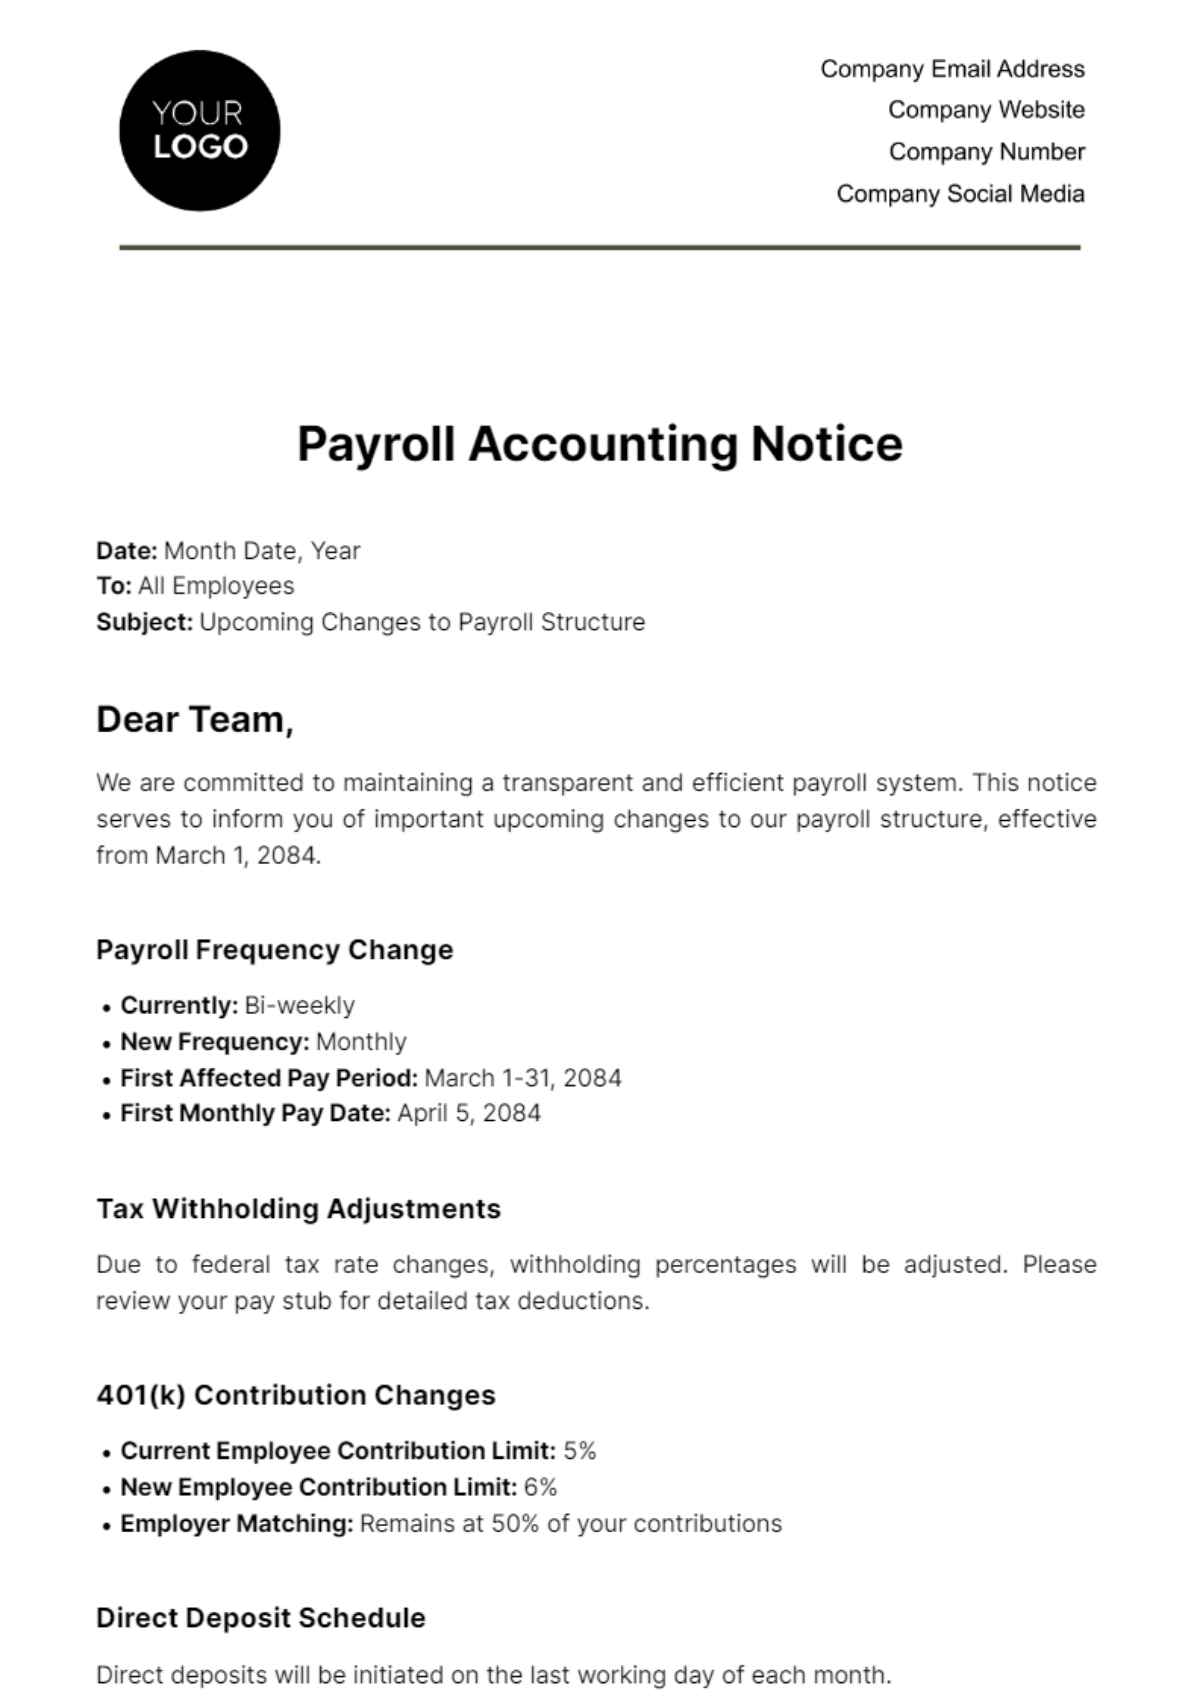 Payroll Accounting Notice Template